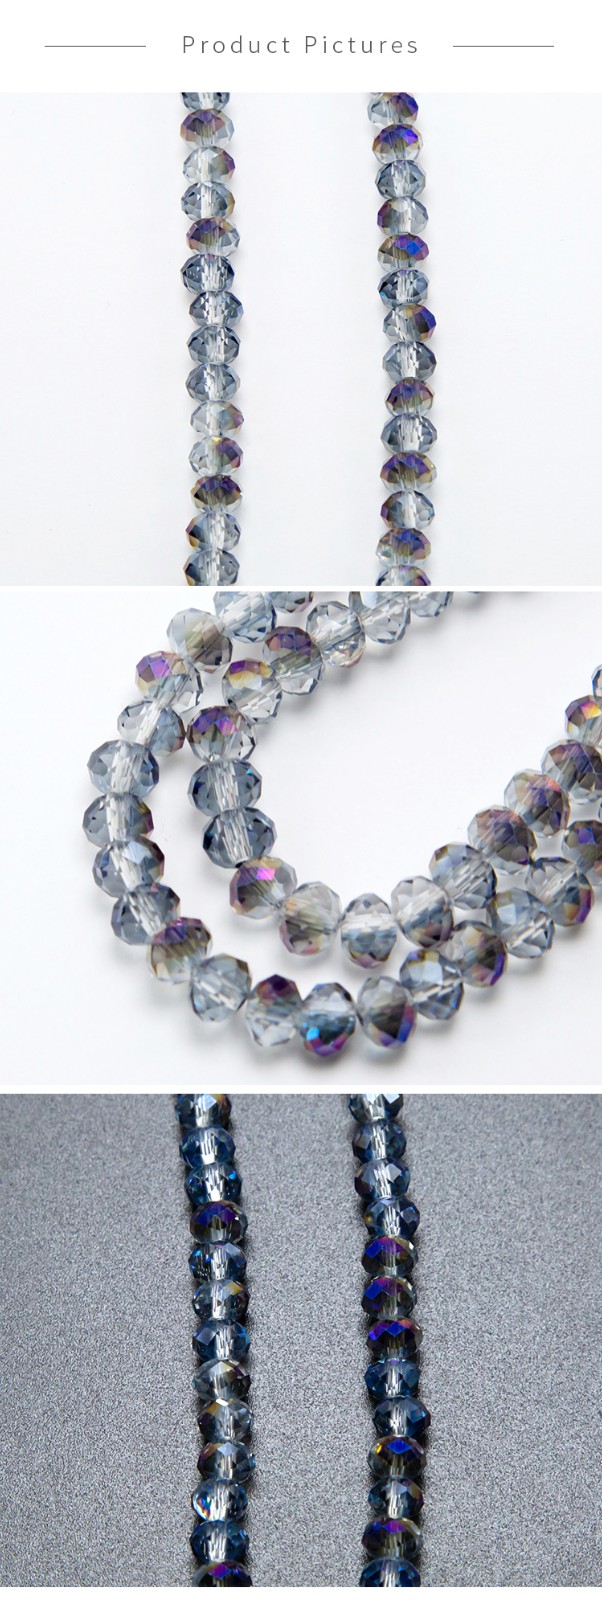 6x4mm Transparent Purple Faceted Rondelle Glass Beads